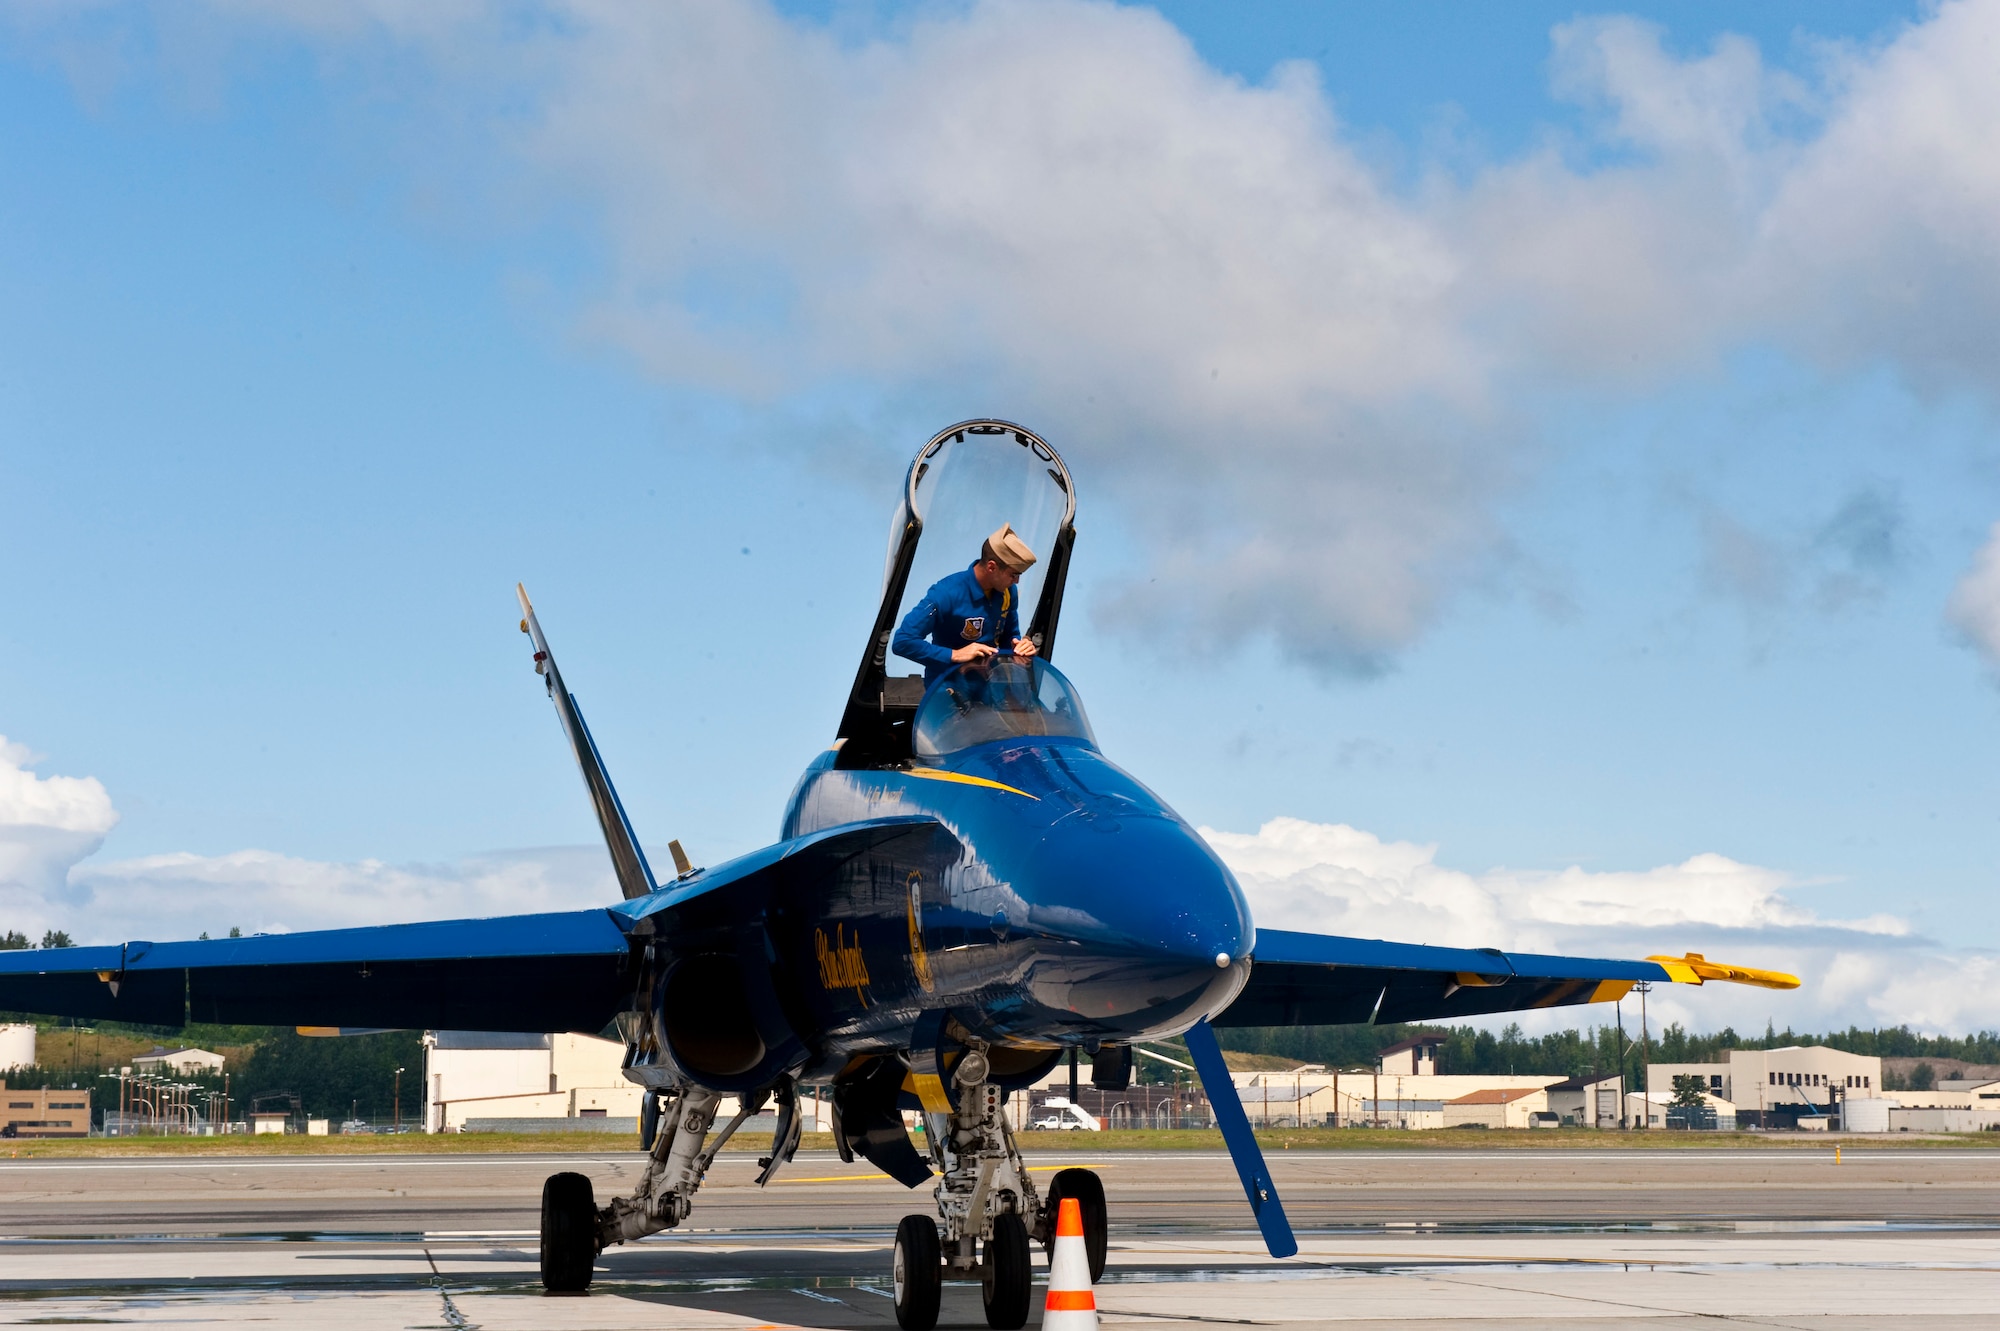 JOINT BASE ELMENDORF RICHARDSON, Alaska --U.S. Navy Blue Angels pilot exit his aircraft after arriving at Joint Base Elmendorf-Richardson July 27. The Blue Angels will be one of the main performances during this year?s Arctic Thunder Air Show, taking place July 31 and Aug. 1. Gates open at 9 a.m. and parking and admission are free. (Air Force photo by Airman 1st Class Jack Sanders)